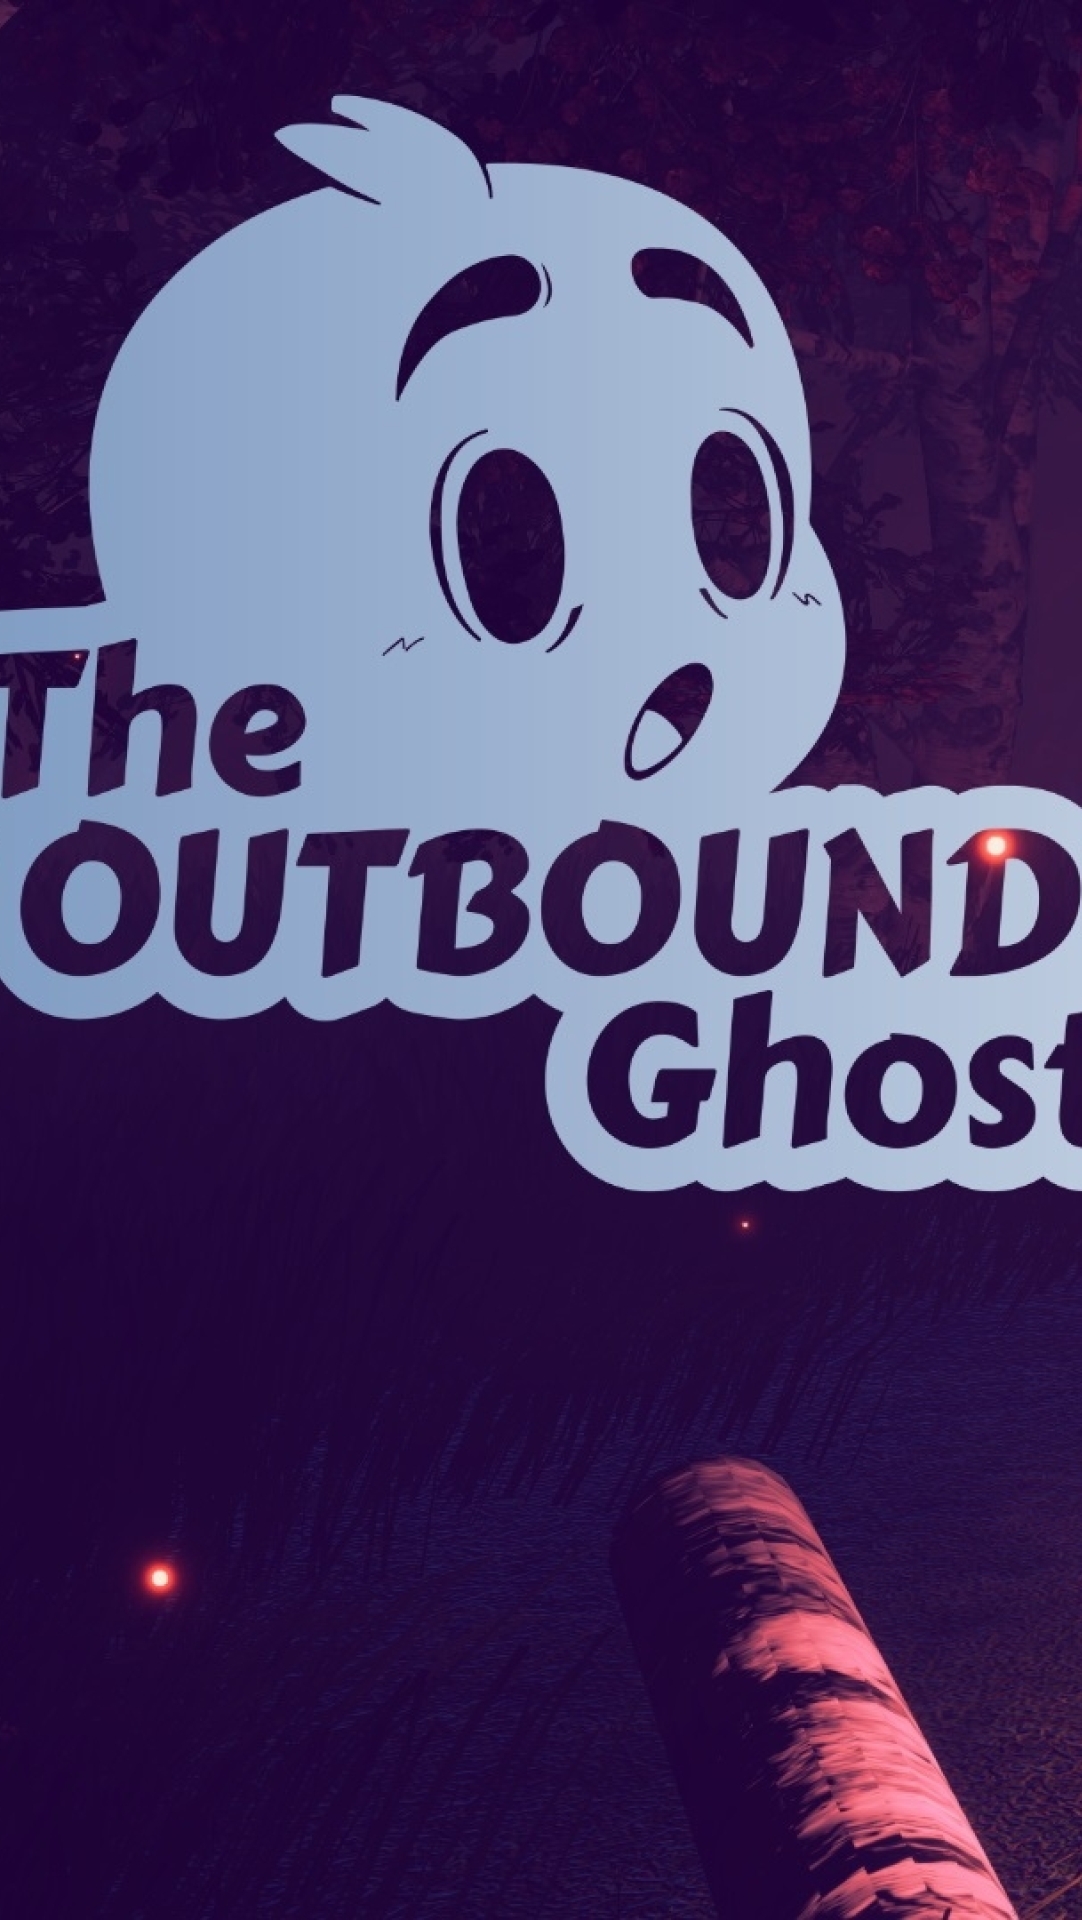 download the new version The Outbound Ghost